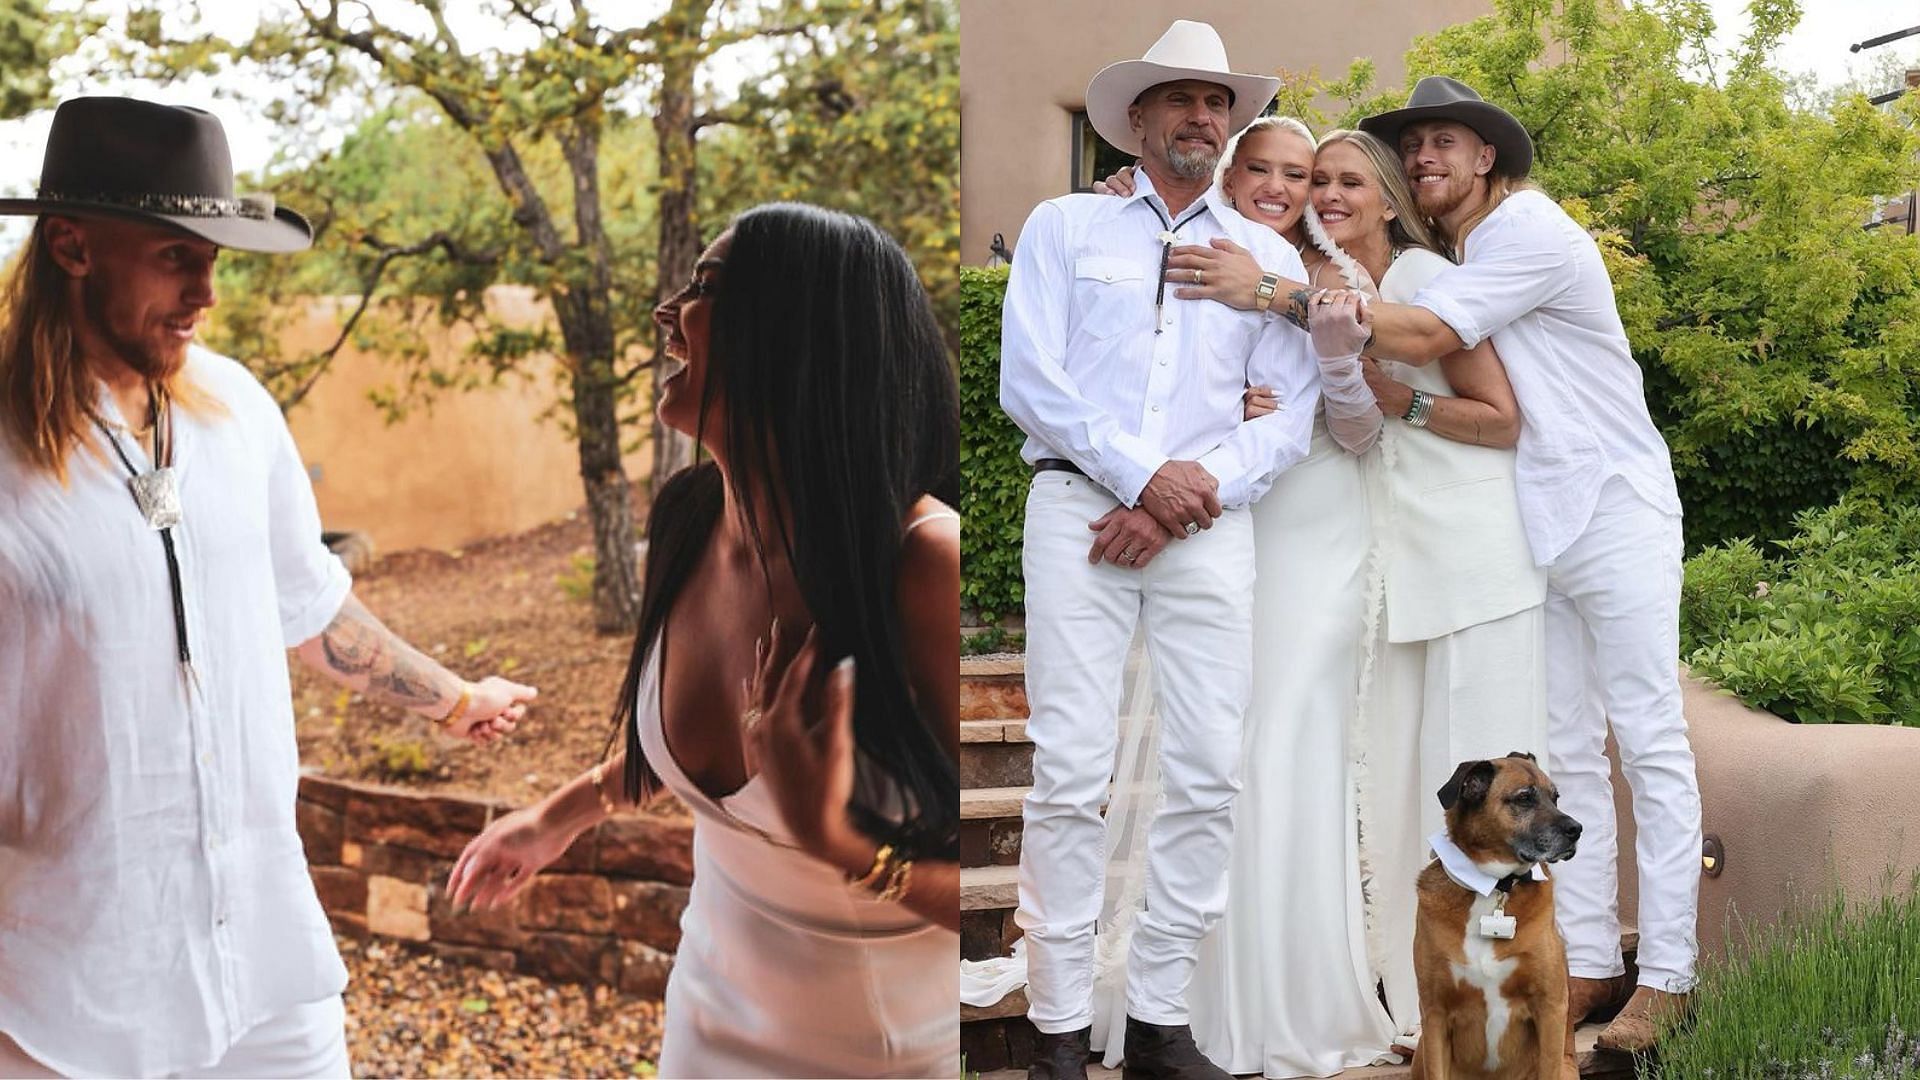 Photos from Emma Kittle and Cody Ponce&#039;s wedding (Image credit: gkittle/Instagram)